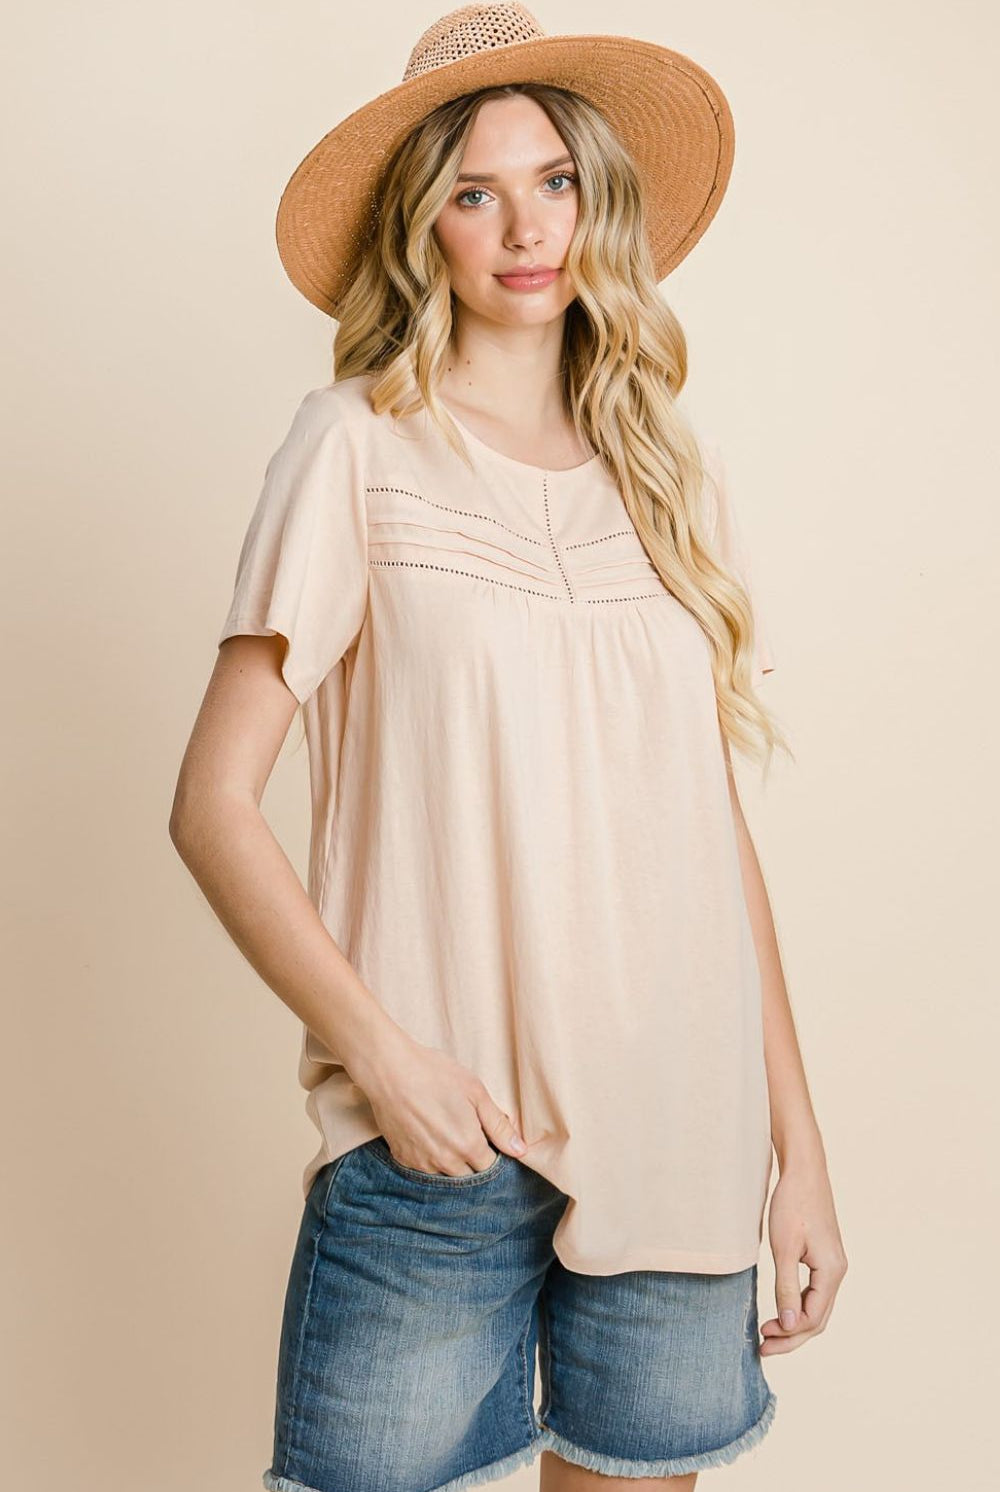 Woman wearing a peach cotton t-shirt with eyelet details, paired with denim shorts and a straw hat.